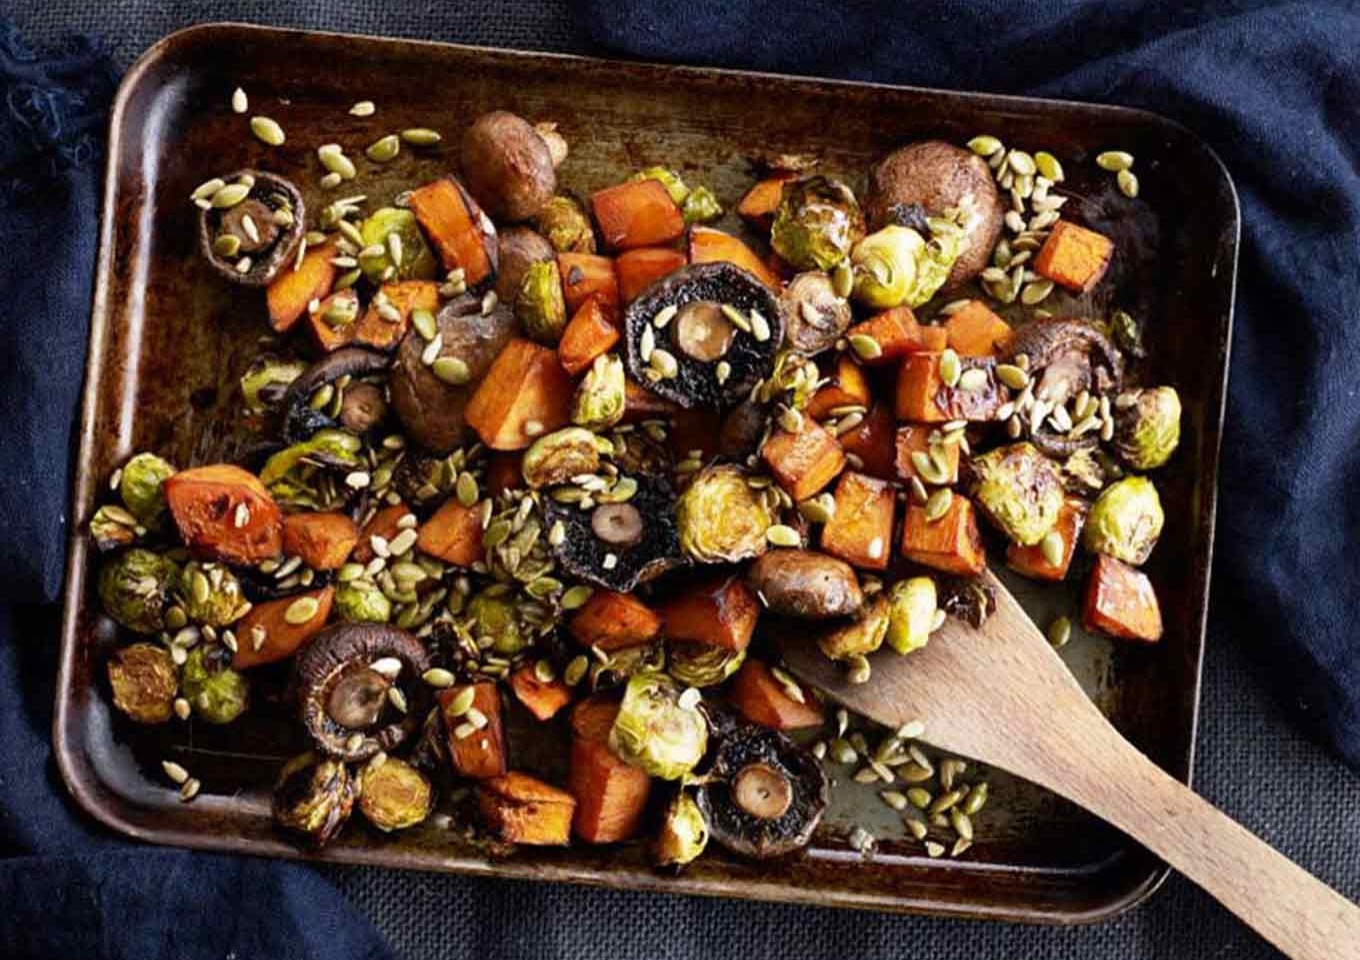 Pan roasted mushroom, pumpkin & Brussels sprouts with seeds